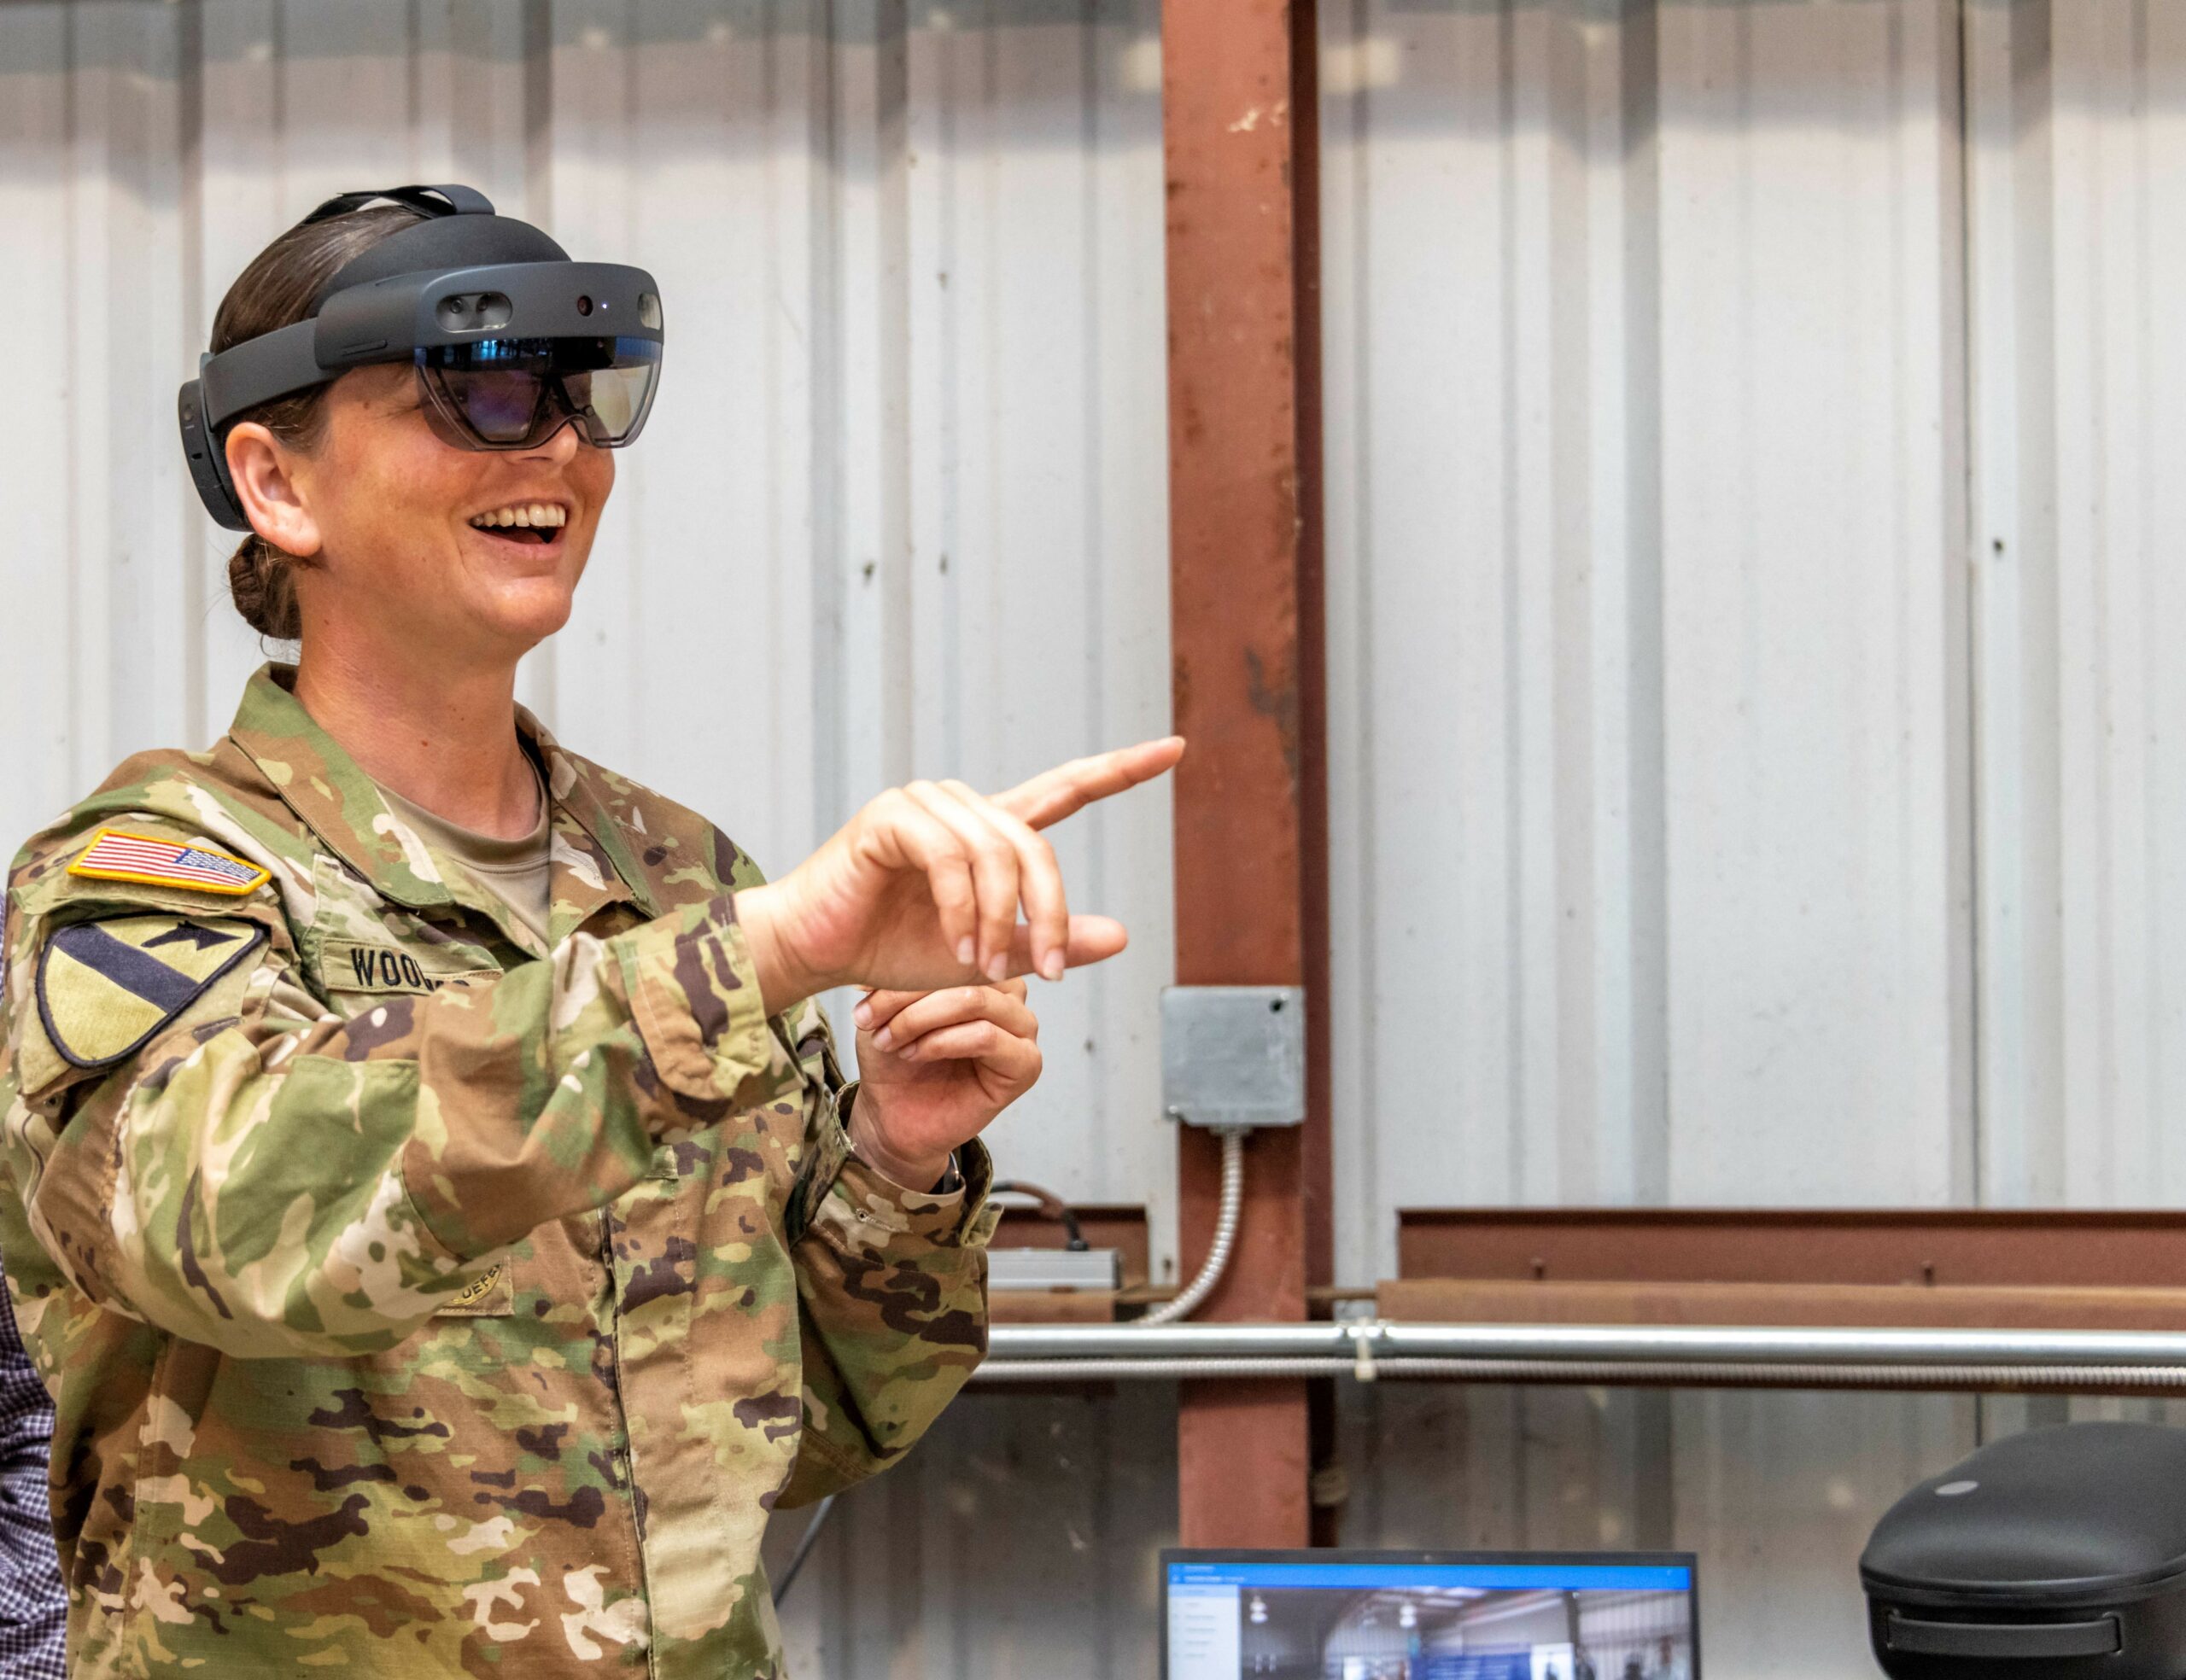 Staff Sgt. Jennifer Woolums, a tactical power generation specialist with 2nd Brigade Combat Team, 3rd Infantry Division, participates in the May 2023 technology demonstration at Aberdeen Proving Ground for a first-hand look at the C5ISR Center’s work. (U.S. Army photo by Deirdre Cascardo)